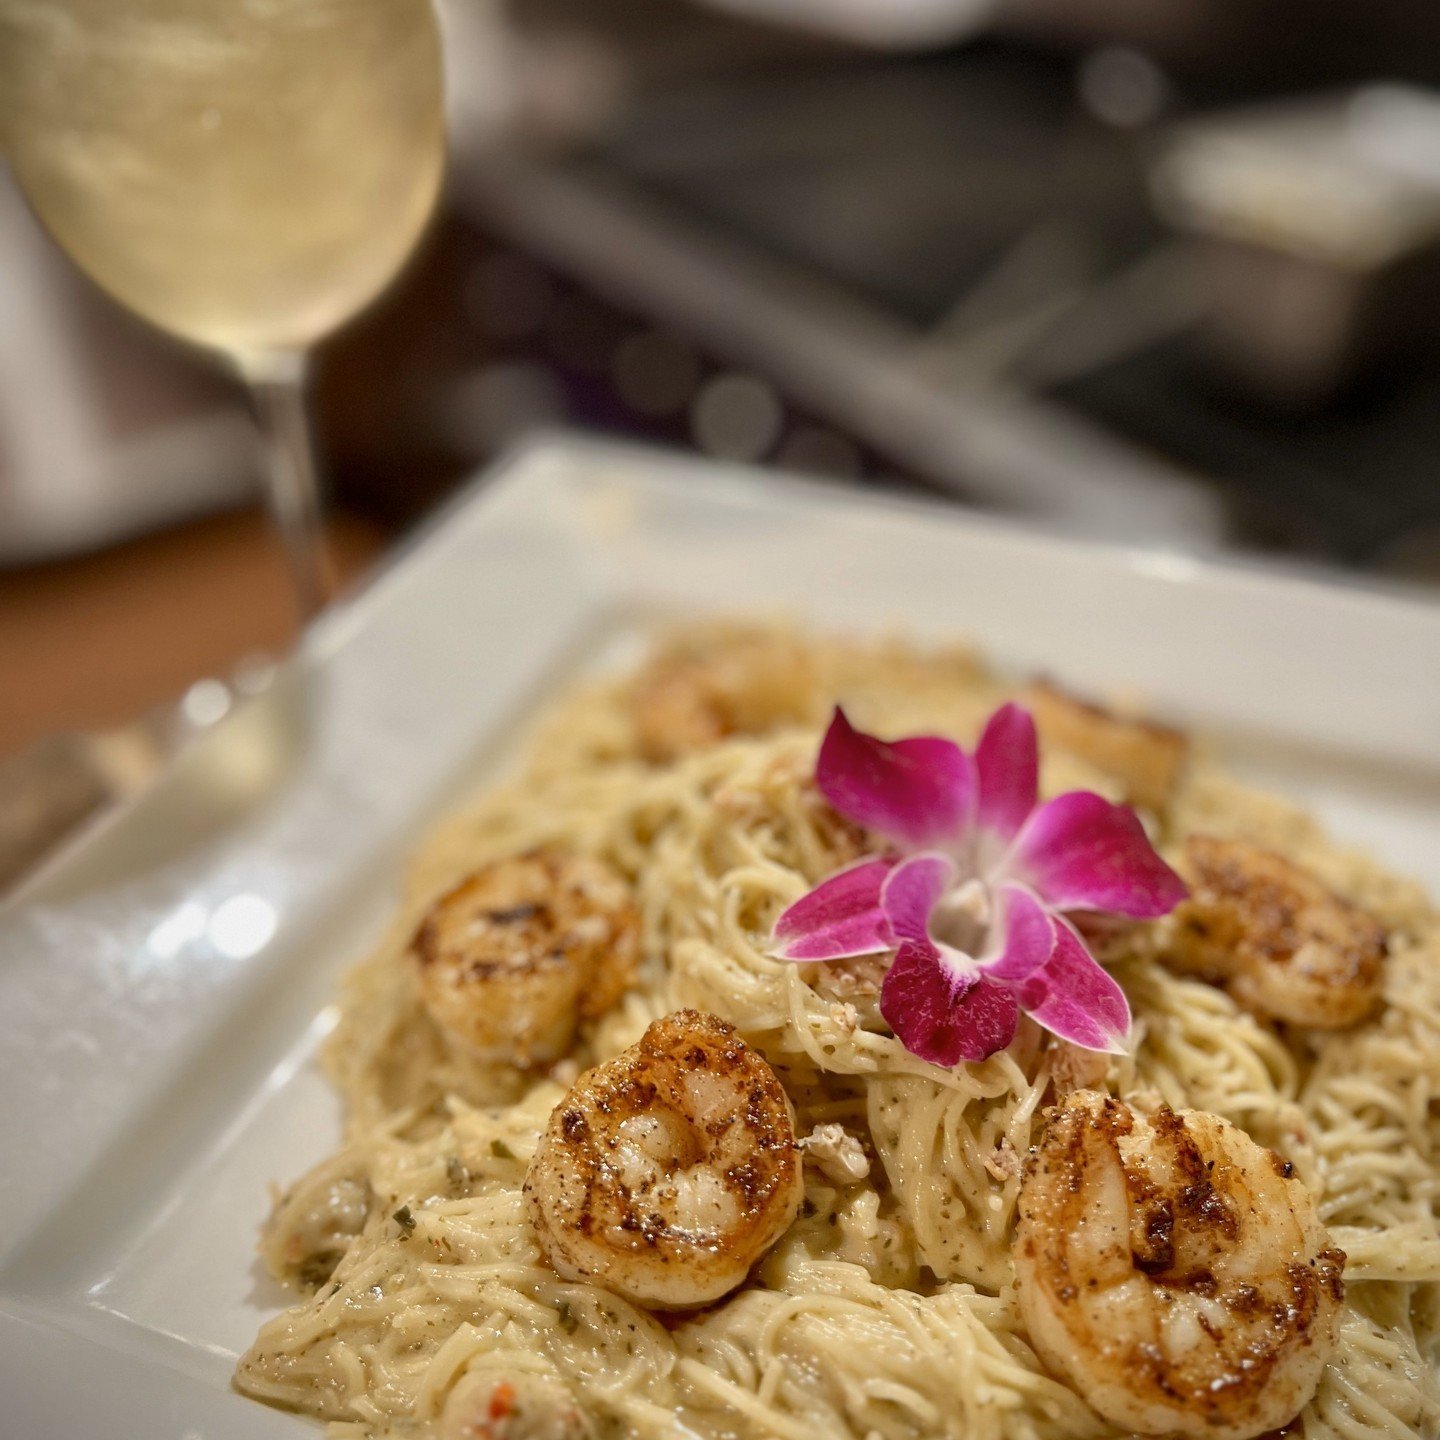 ‼️Weekend Special‼️

This Friday and Saturday's special is creamy seafood pesto pasta for $22.99. Angel hair pasta tossed in a crawfish pesto cream sauce topped with jumbo grilled shrimp and lump crabmeat served with a side dinner salad.